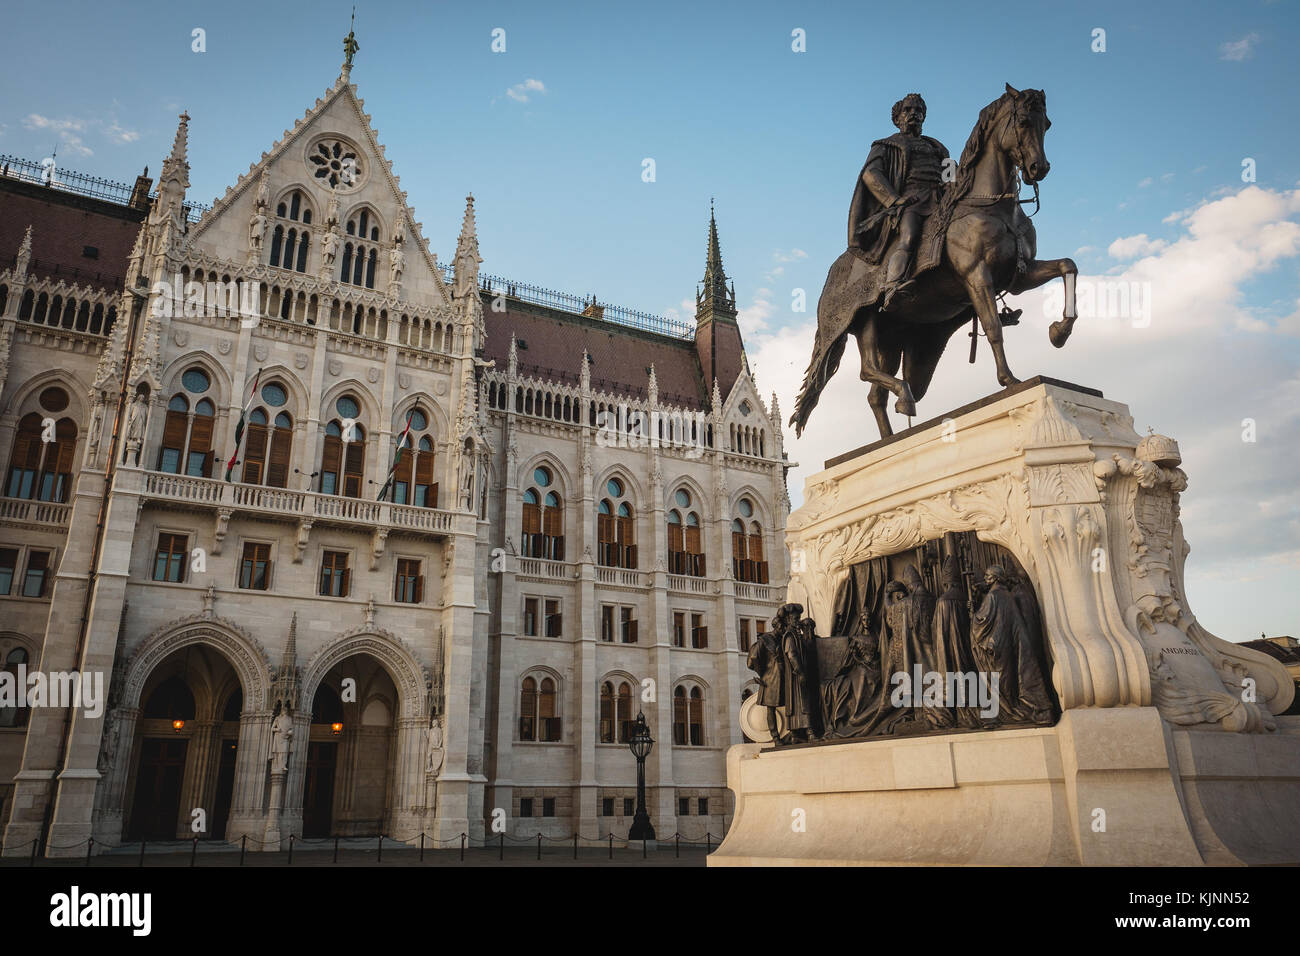 Statue of Gyula Andrássy in front of the Hungarian Parliament Building in Budapest (Hungary). June 2017. Landscape format. Stock Photo